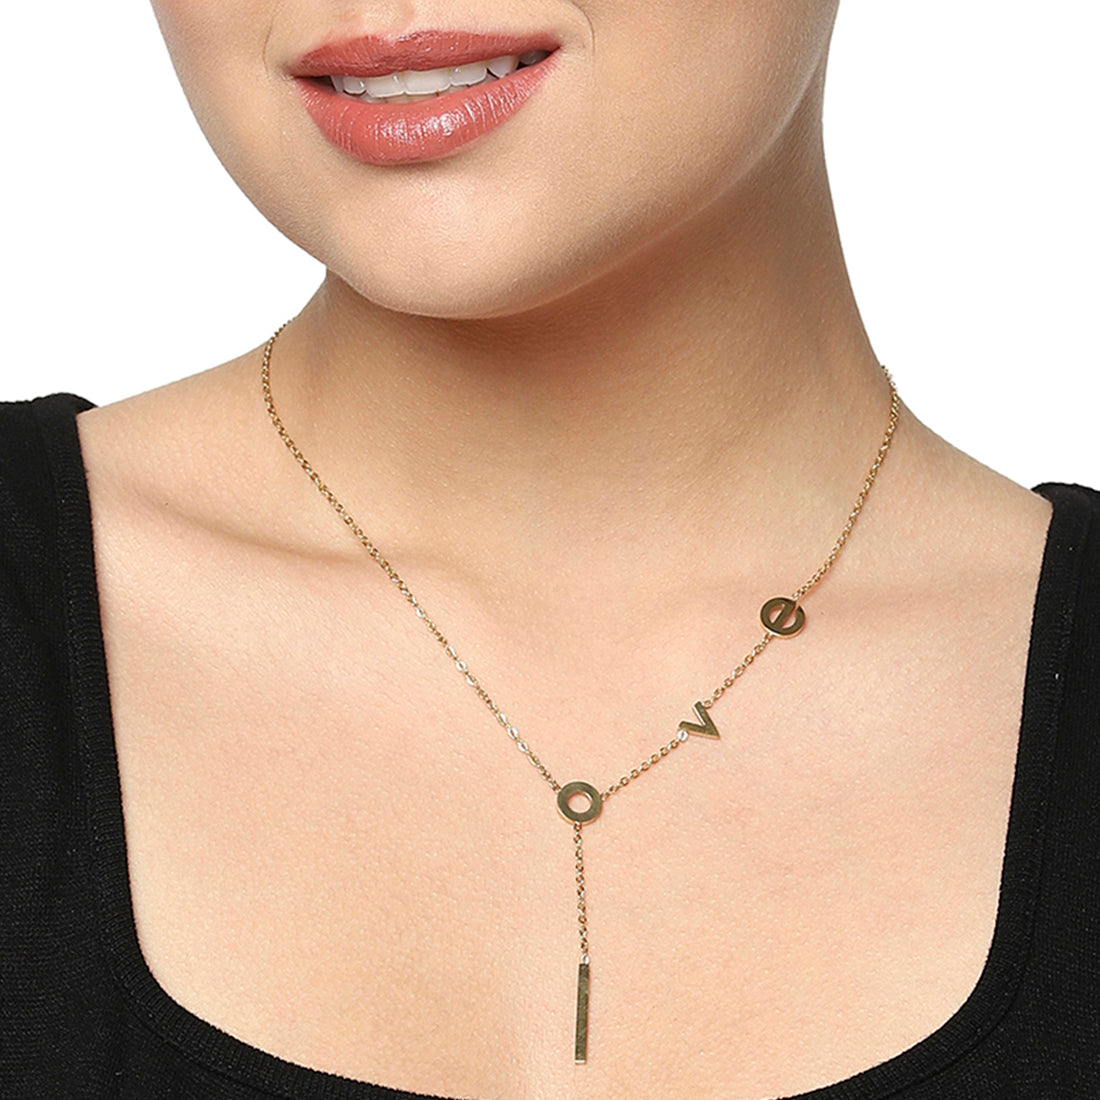 Women's Love In A Charm Lariat Gold Plated Necklace - Voylla